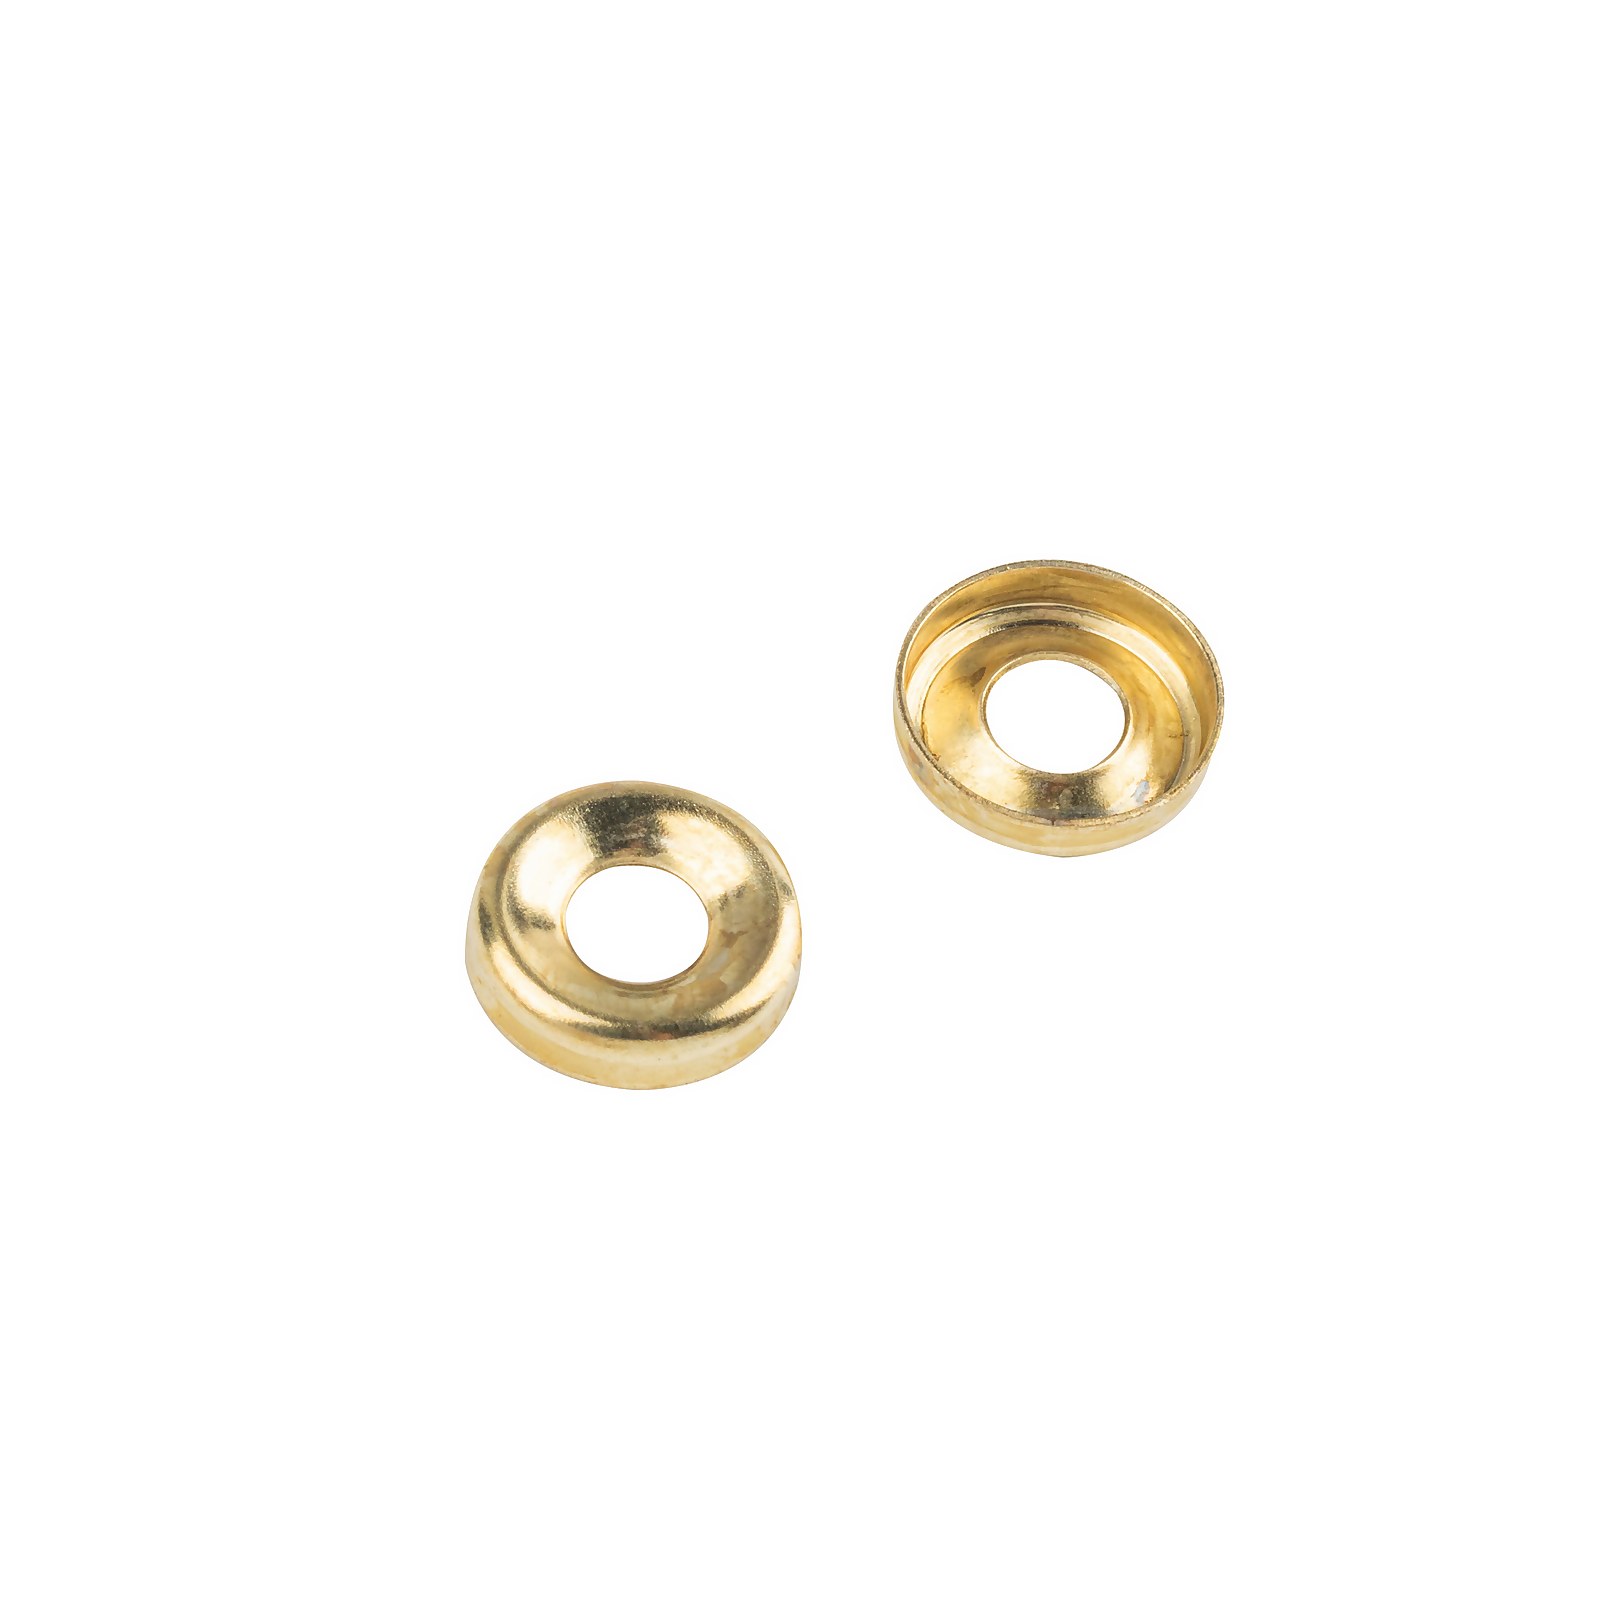 Photo of Homebase Brass Plated Screw Cup Washer 5mm X 20 Pack